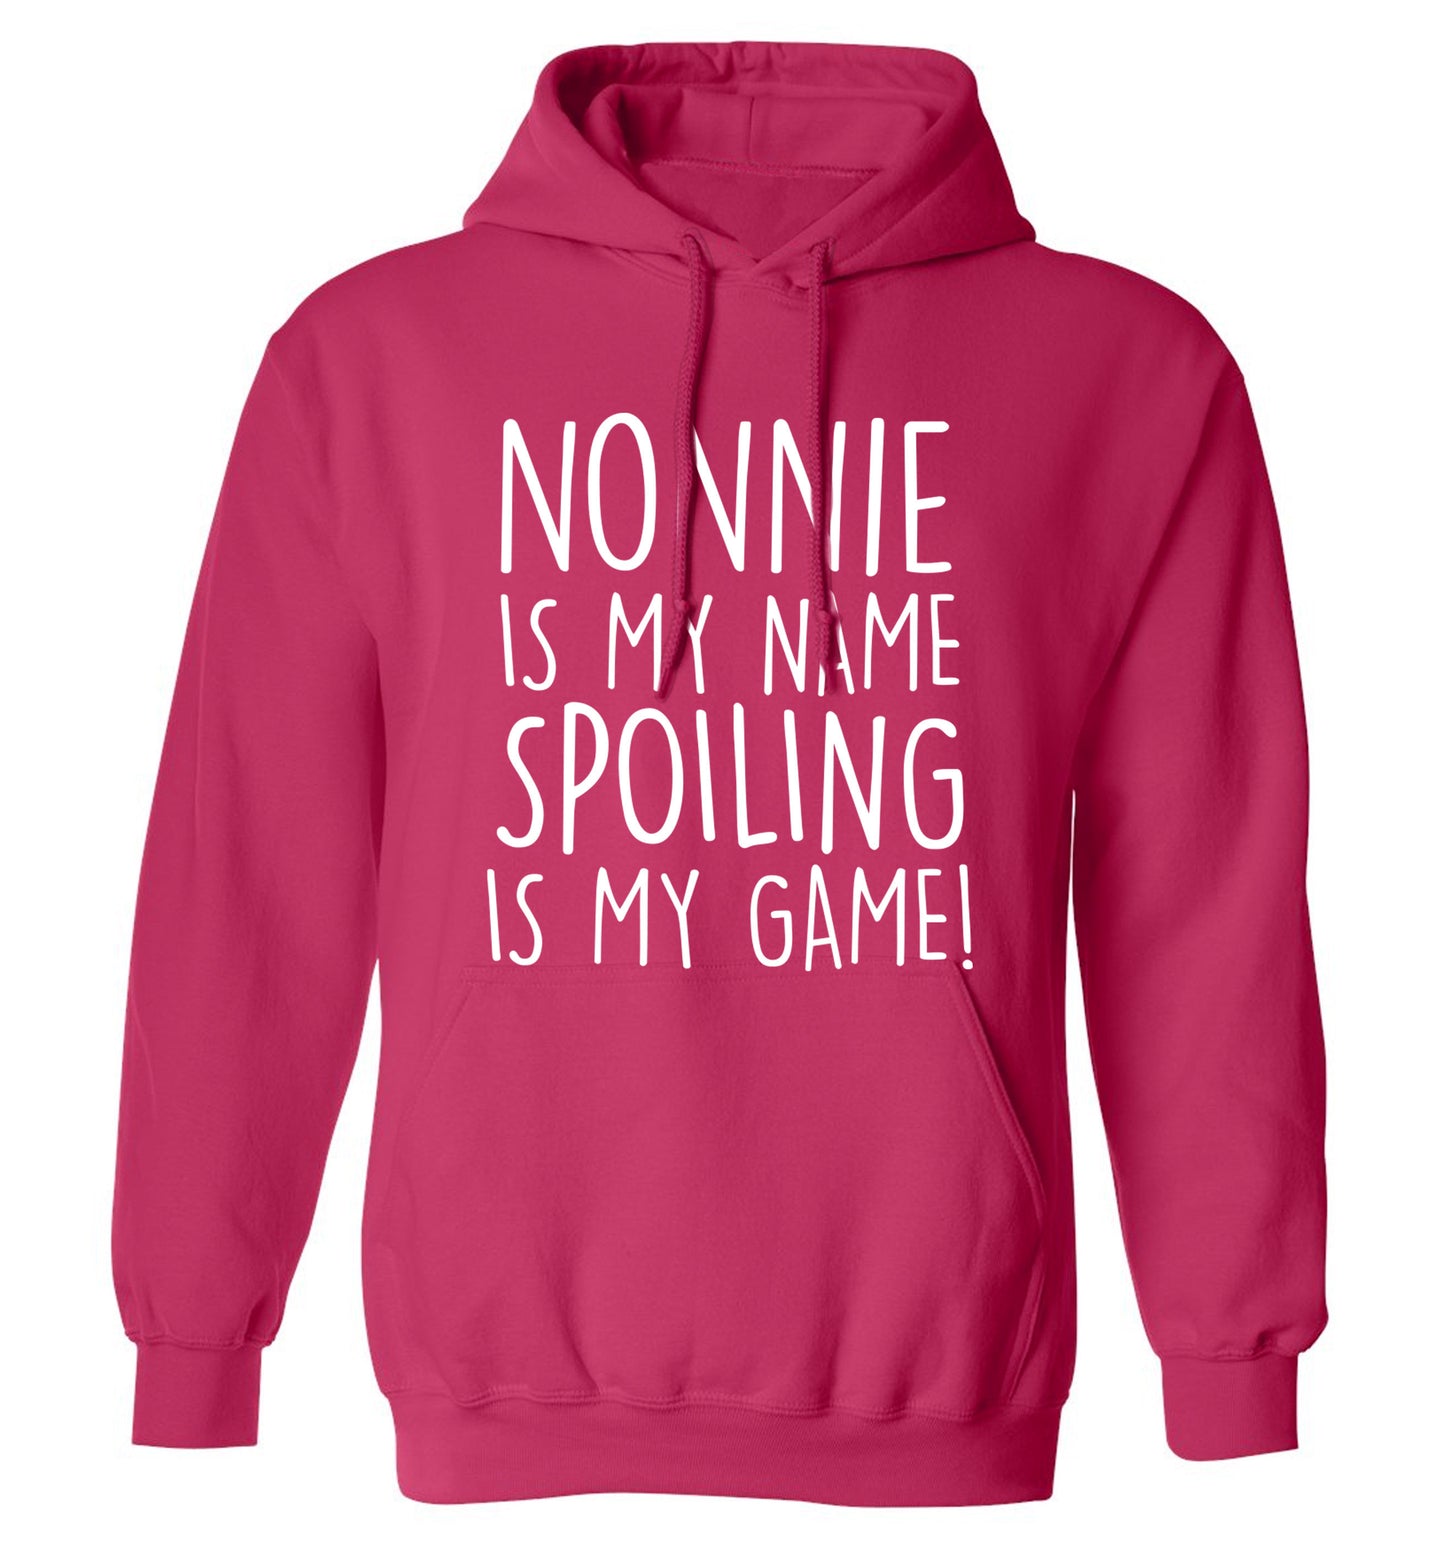 Nonnie is my name, spoiling is my game adults unisex pink hoodie 2XL